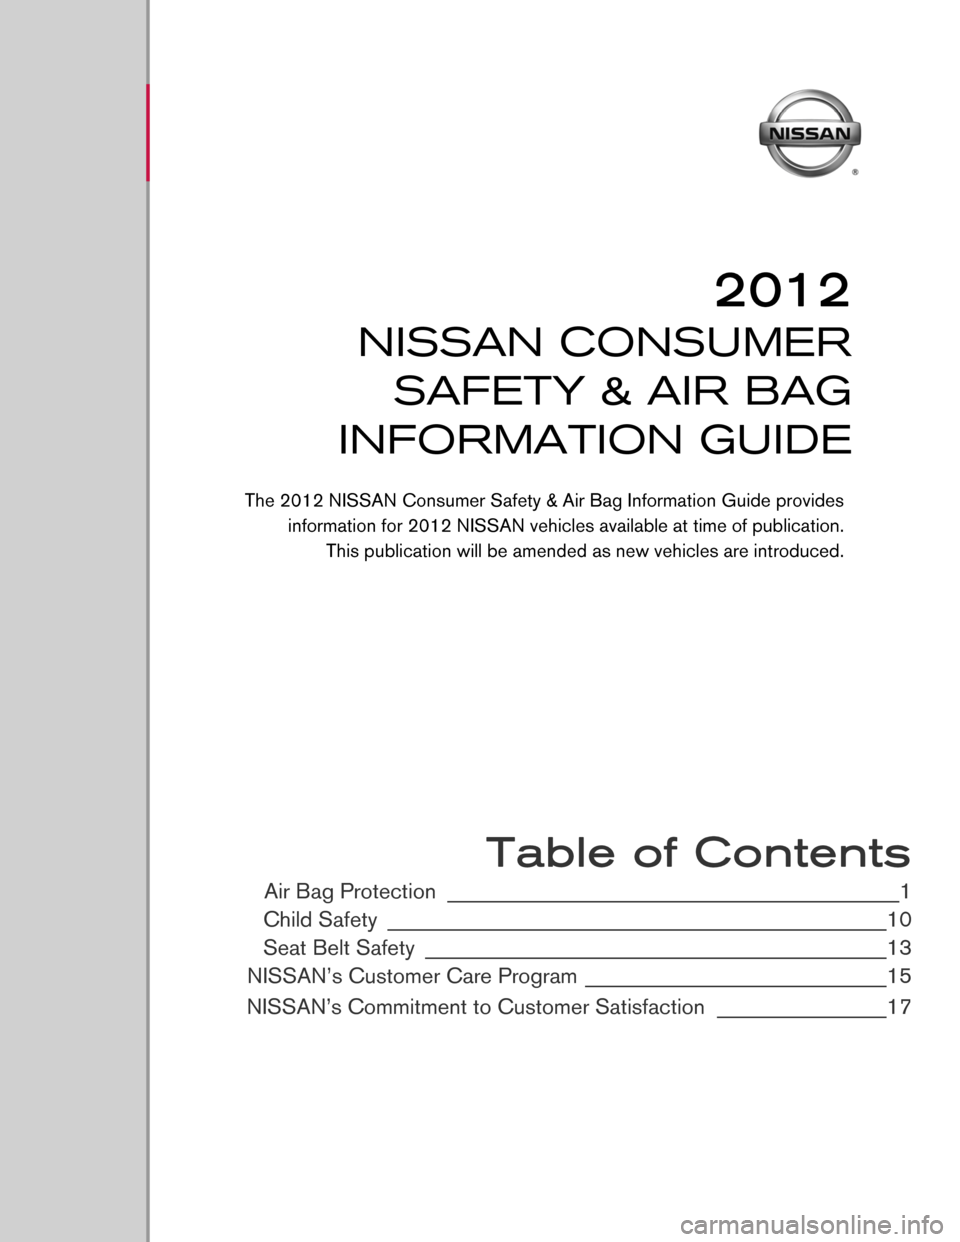 NISSAN JUKE 2012 F15 / 1.G Consumer Safety Air Bag Information Guide  
 
 
 
 
 
 
 
 
 
 
 
 
 
 
 
 
 
 
 
 
 
 
 Table of Contents
Air Bag Protection ________________________________________________1
Child Safety
 ____________________________________________________